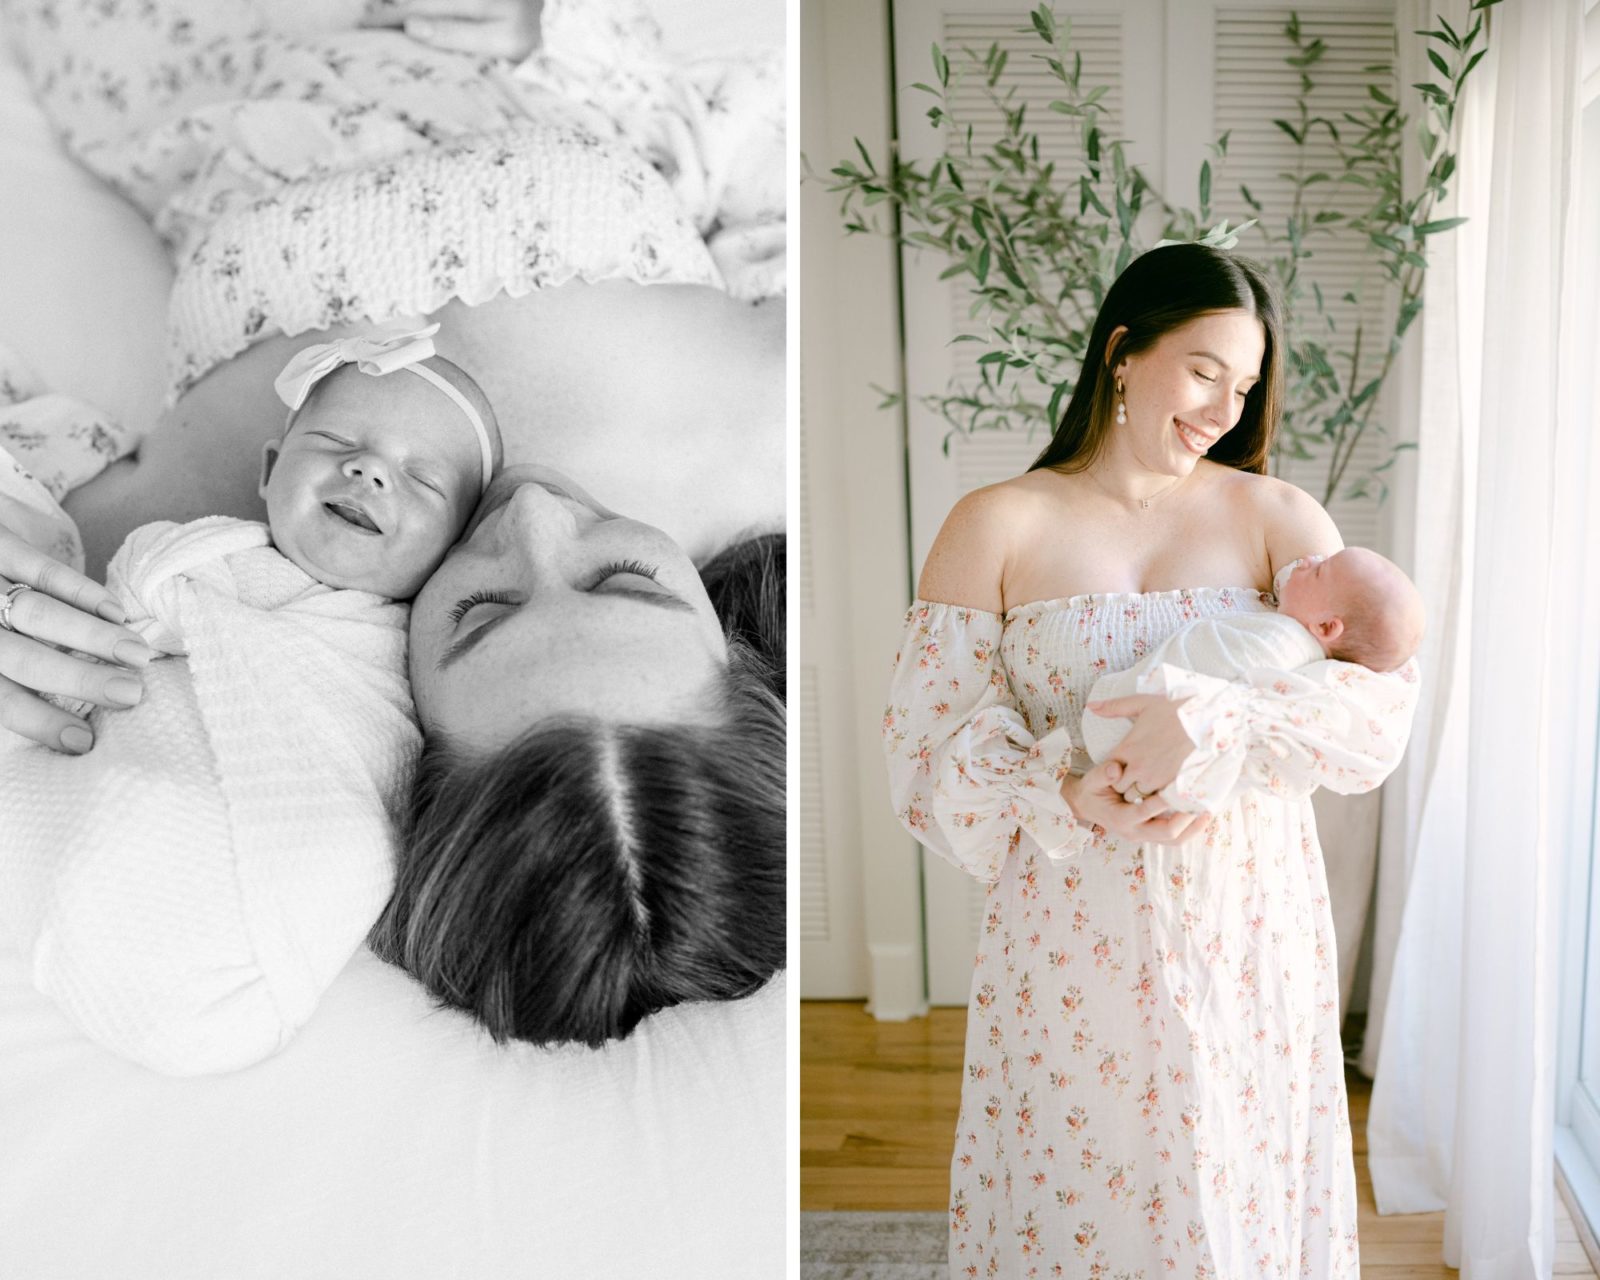 Dreamy photos of mom and her newborn baby 